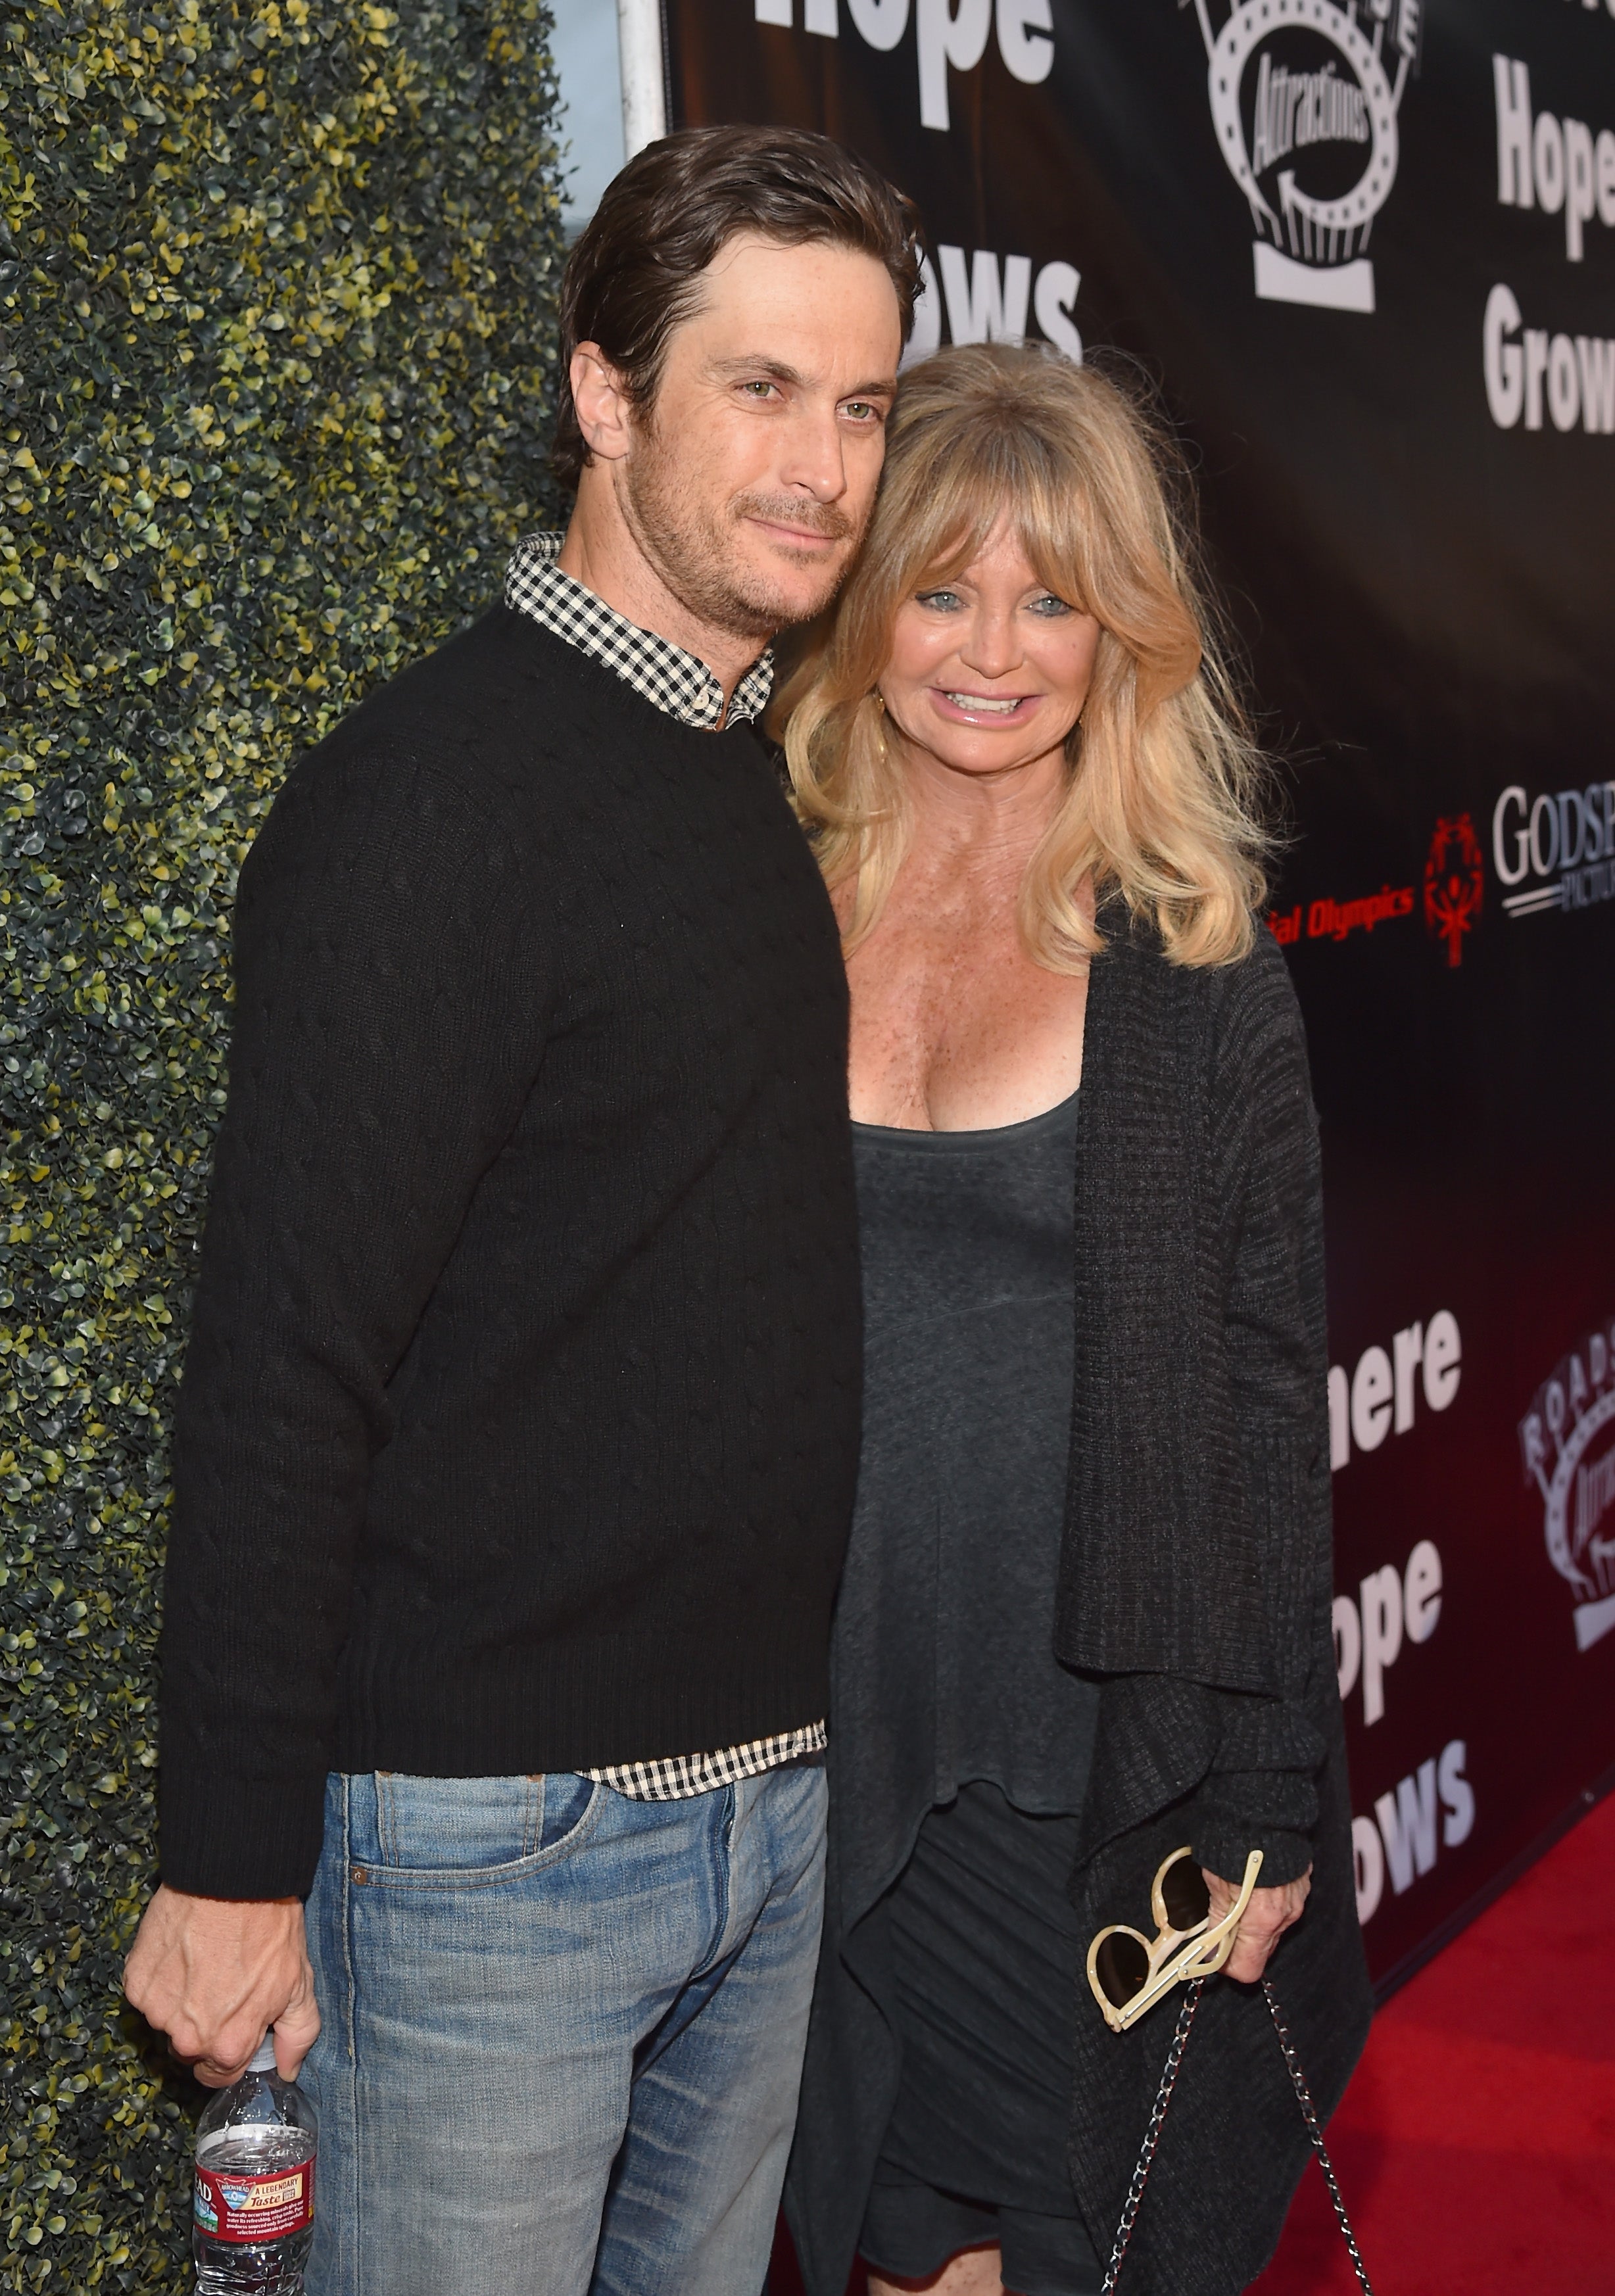 Oliver Hudson with mother, Goldie Hawn